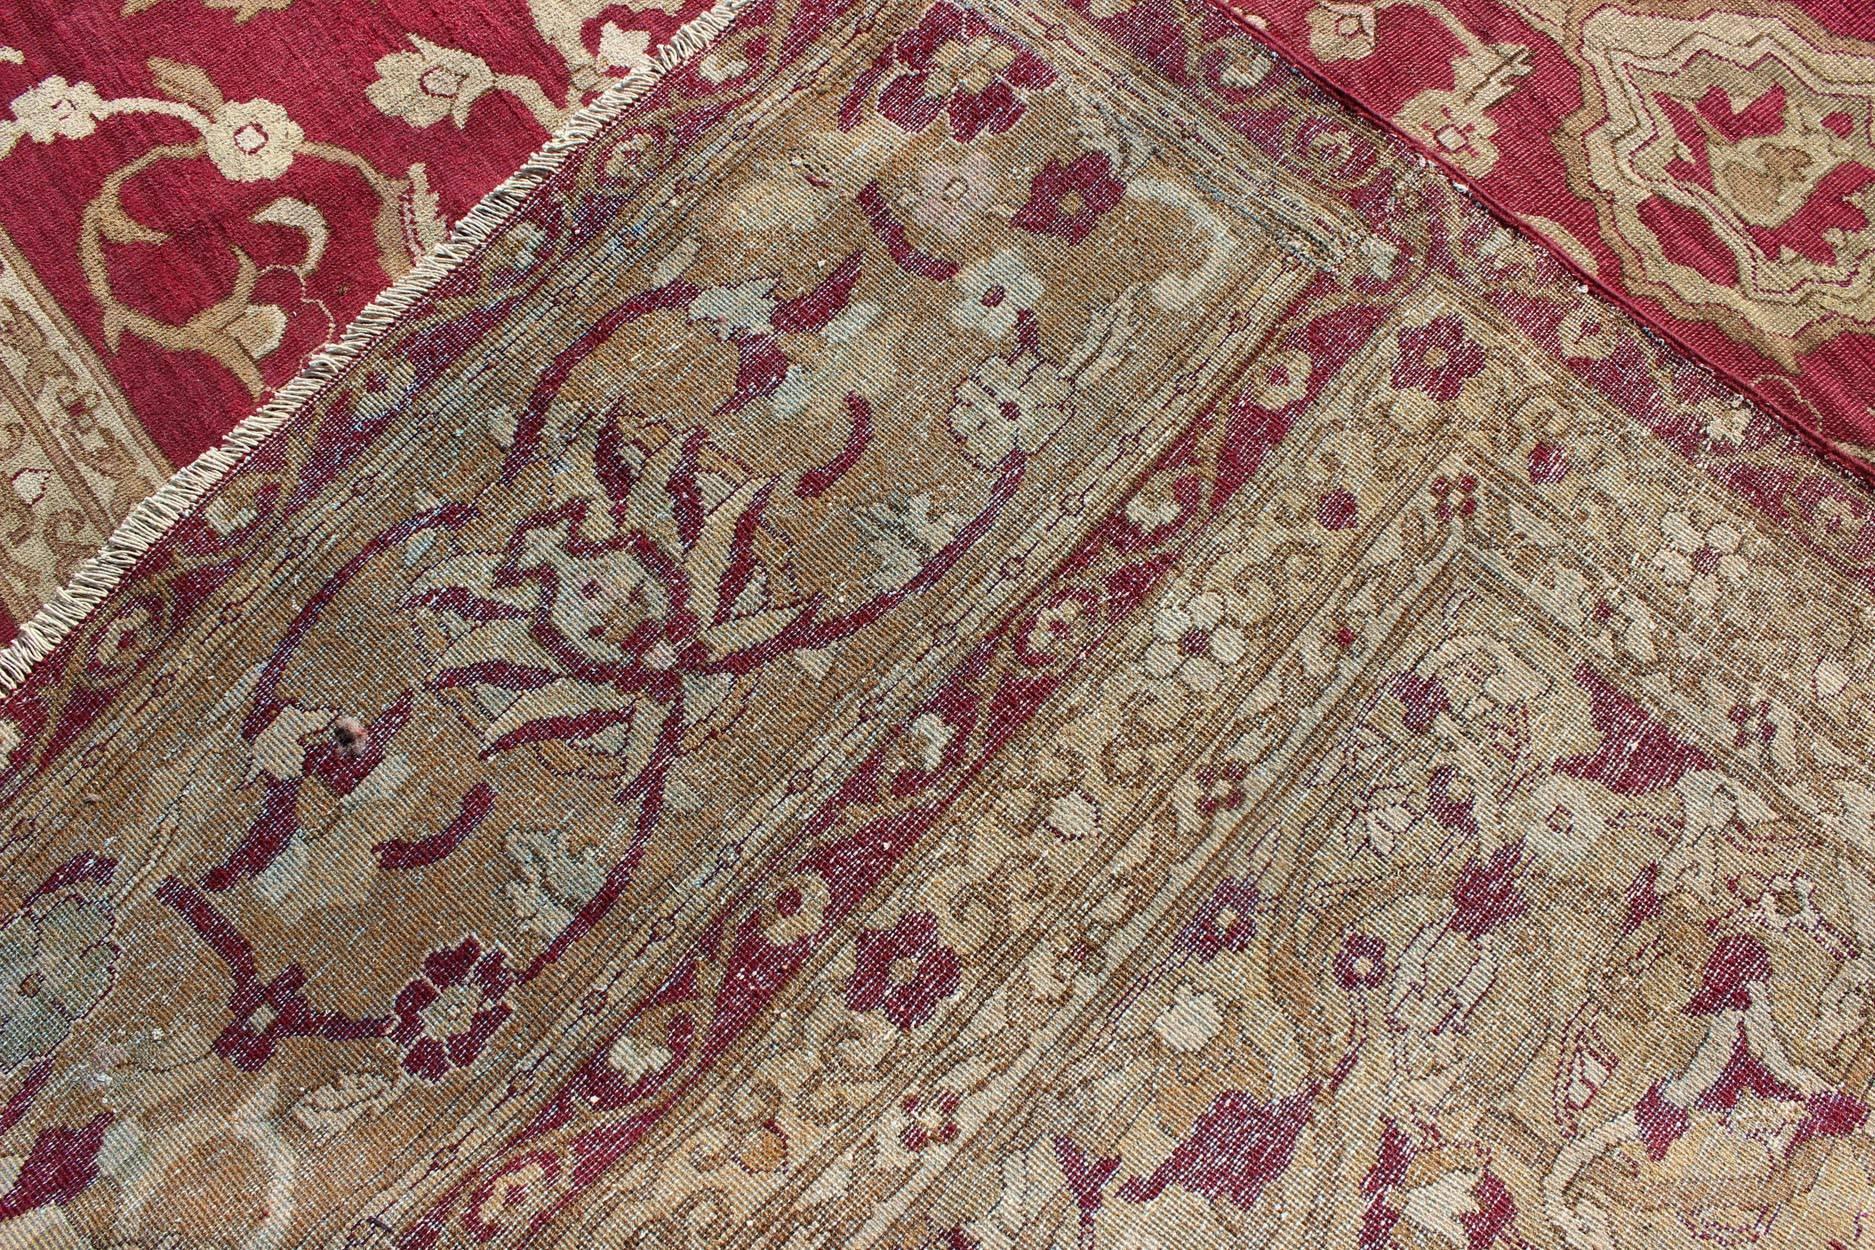 Wool Large Antique Agra Carpet with Floral Design in Red, Taupe and Light Green 